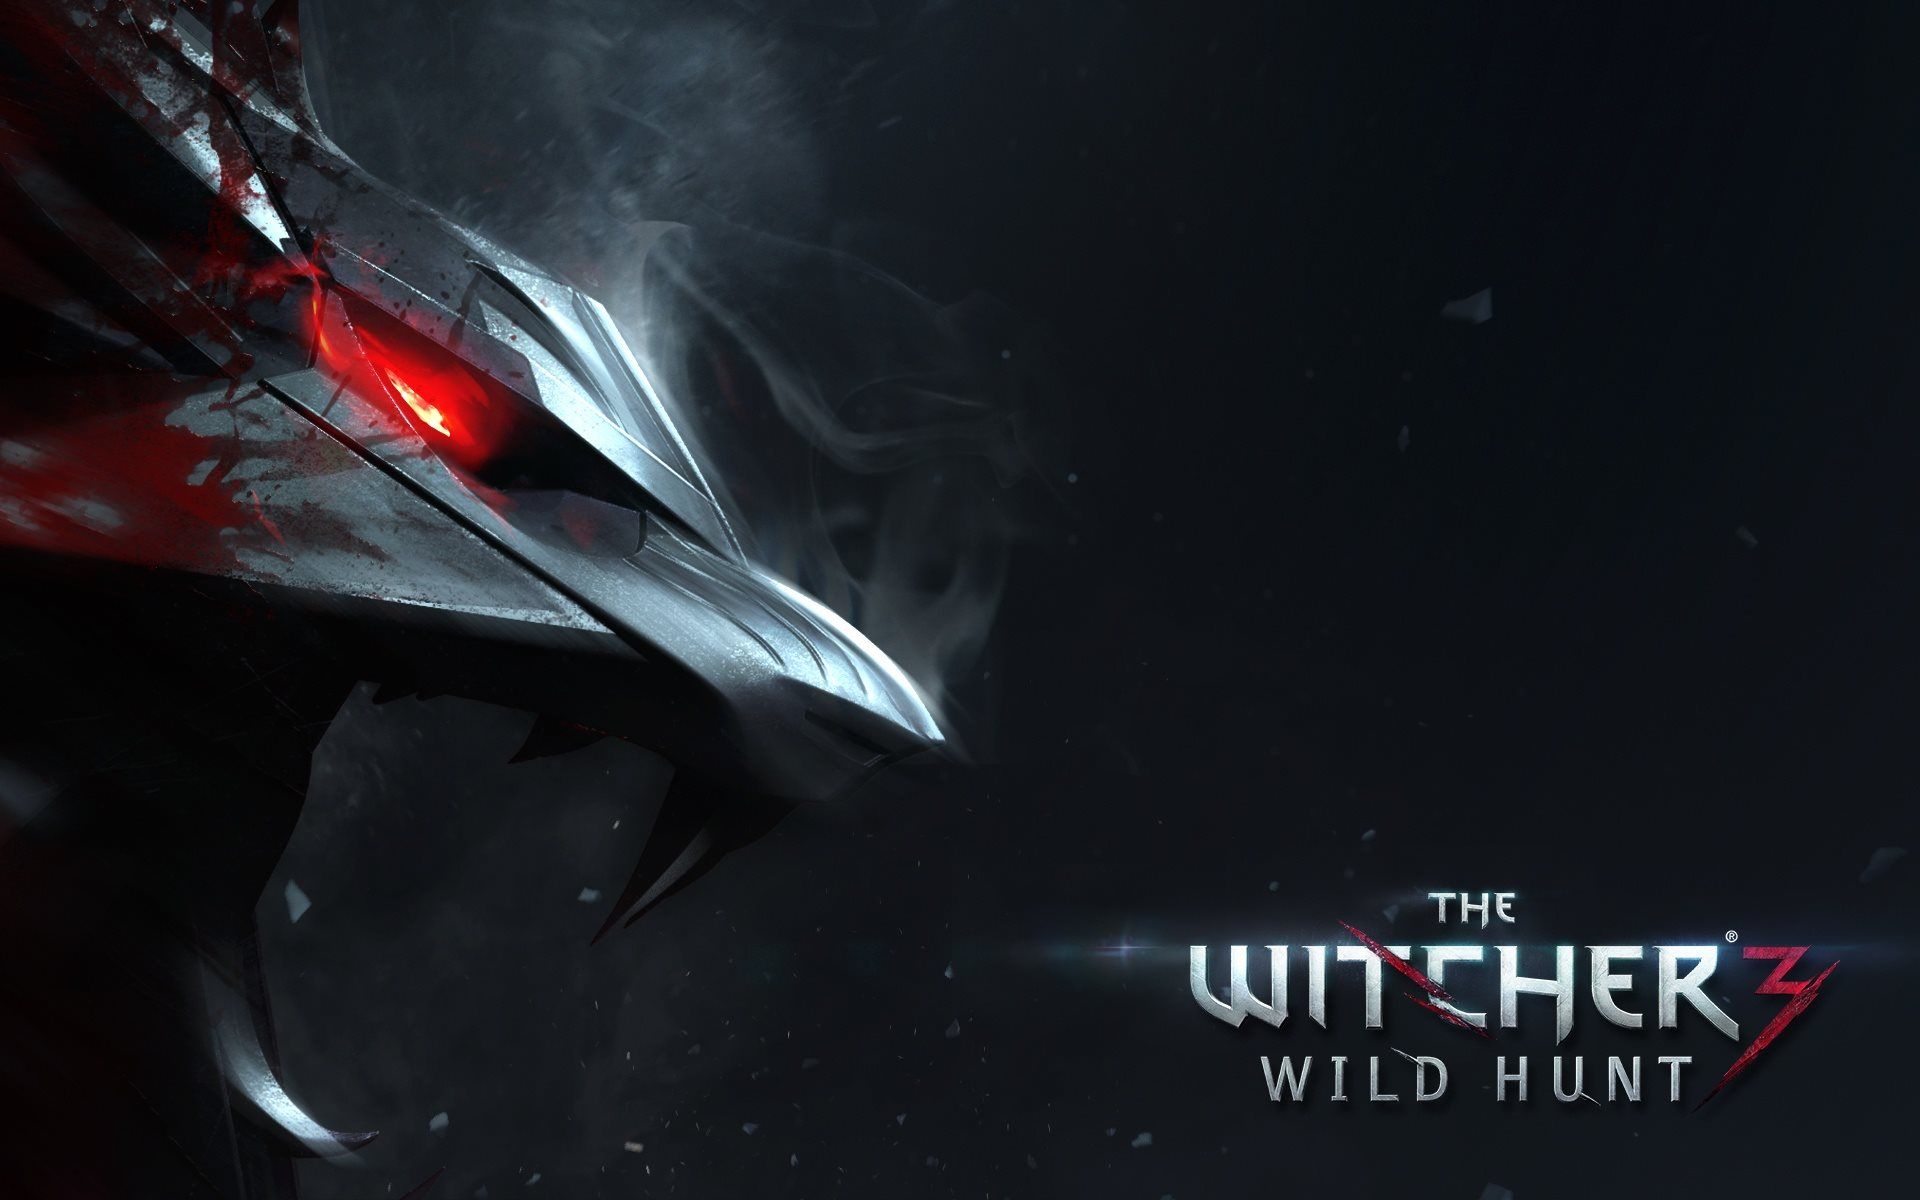 The Witcher 3 Wallpaper(s), Photo(s), Image(s). The witcher wild hunt, The witcher, Wild hunt